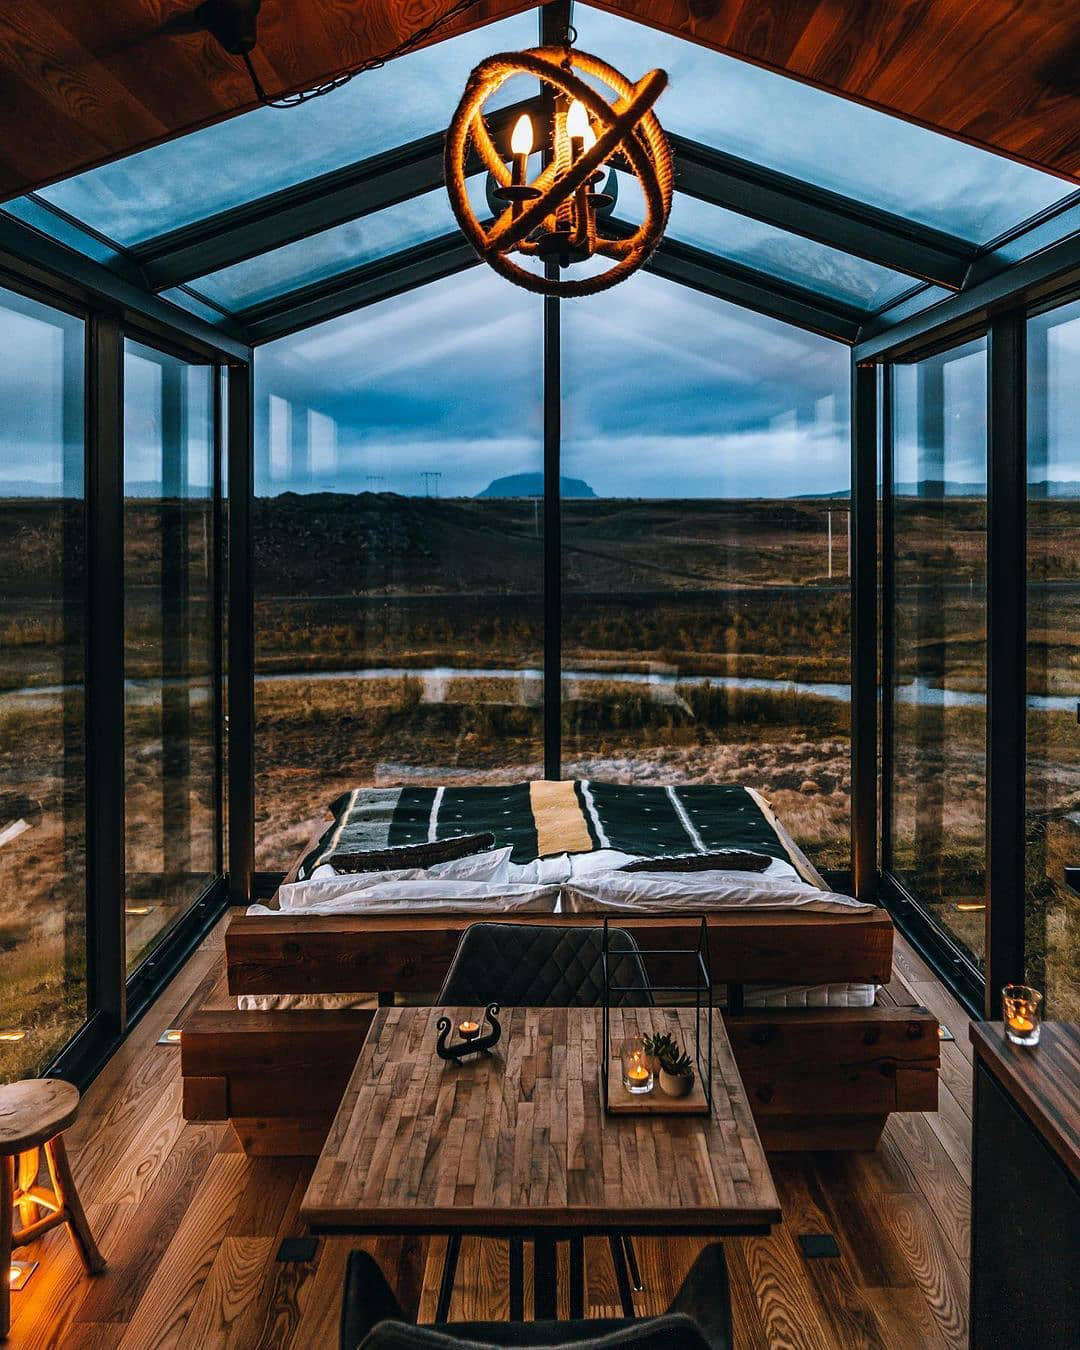 Interior Design District - Tag someone you'd spend #quarantine with in this lovely #cabin